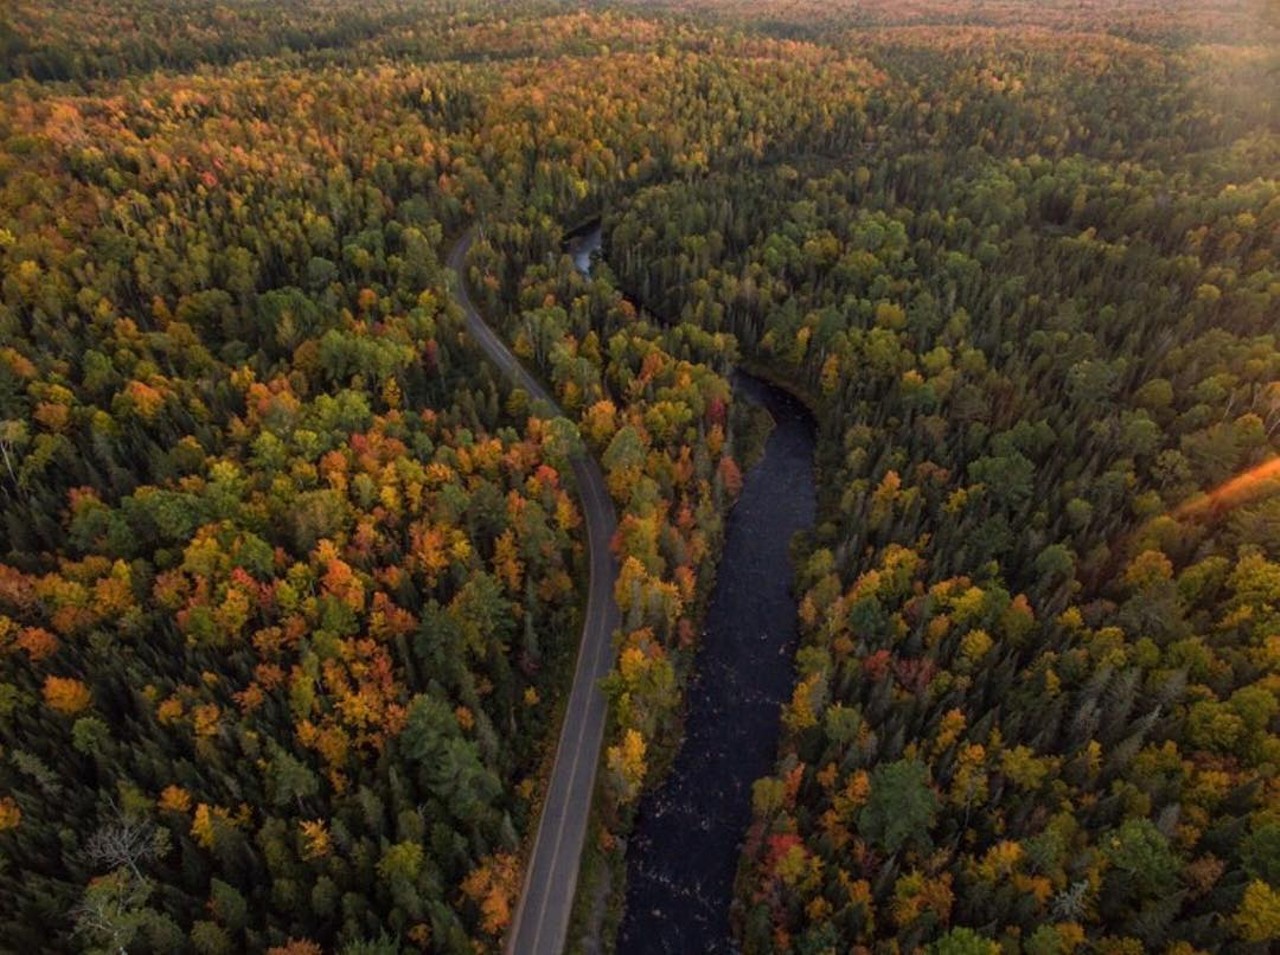 Marquette
On the southern shores of Lake Superior lies Marquette. The home to Northern Michigan University has no shortage of trees that can fill up your instagram with stunning photos of fall.  Photo via Instagram user, Travelmarquette